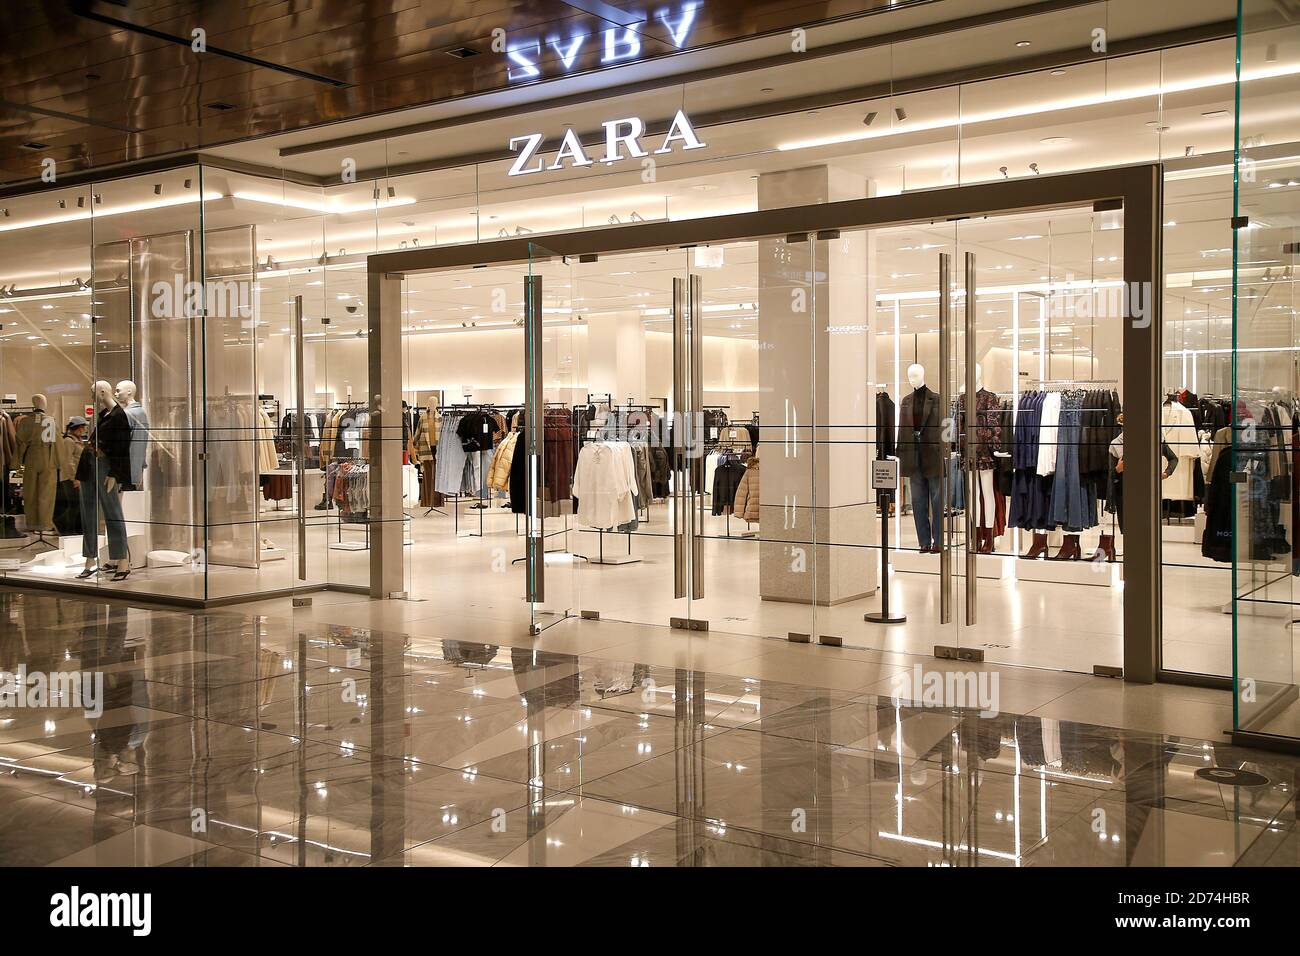 Zara logo and store is seen in Hudson Yards Stock Photo - Alamy